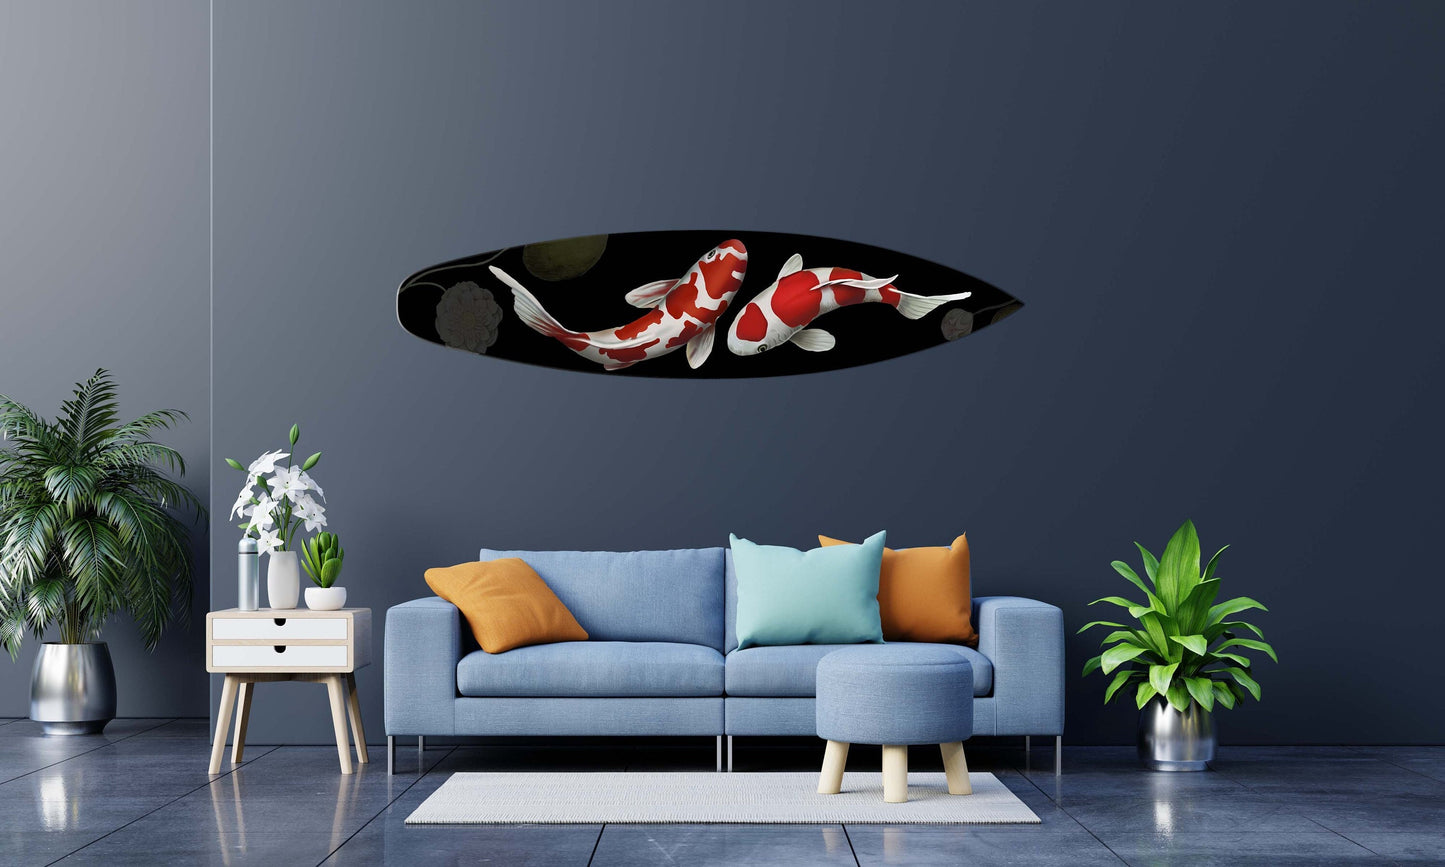 Decorative Surfboard Wall Artwork with Fish Pattern